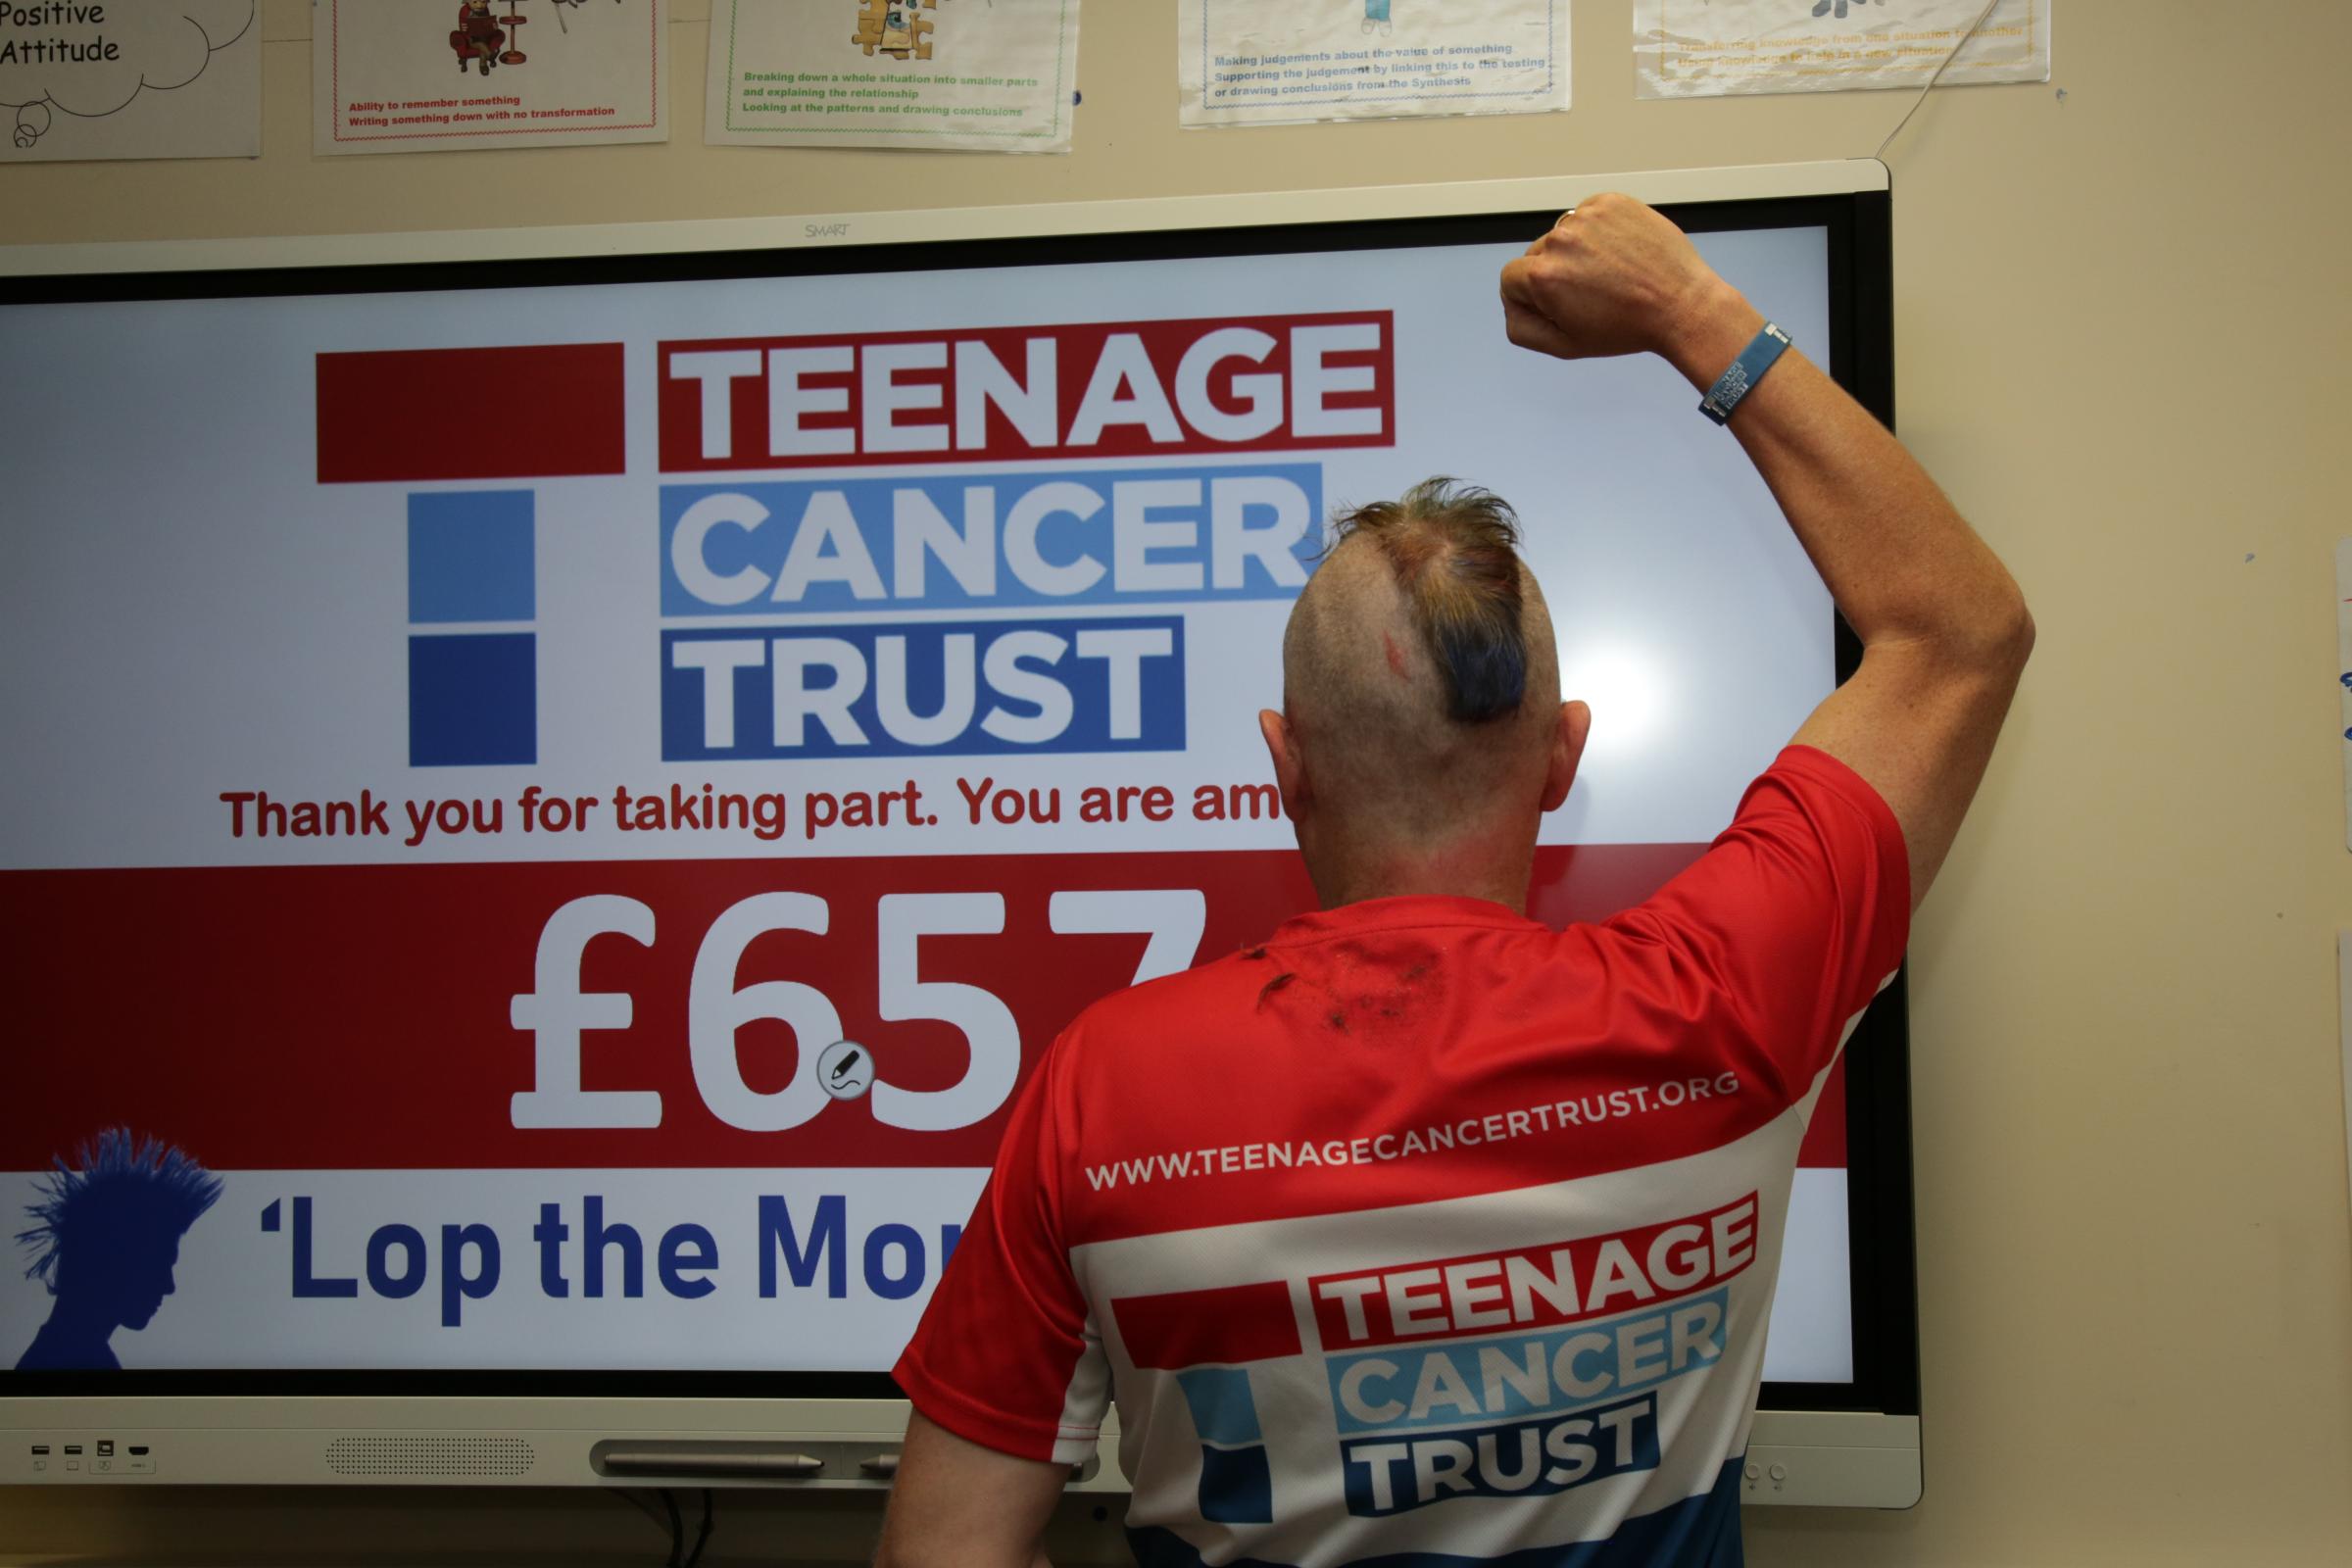 All money raised will go to the Teenage Cancer Trust